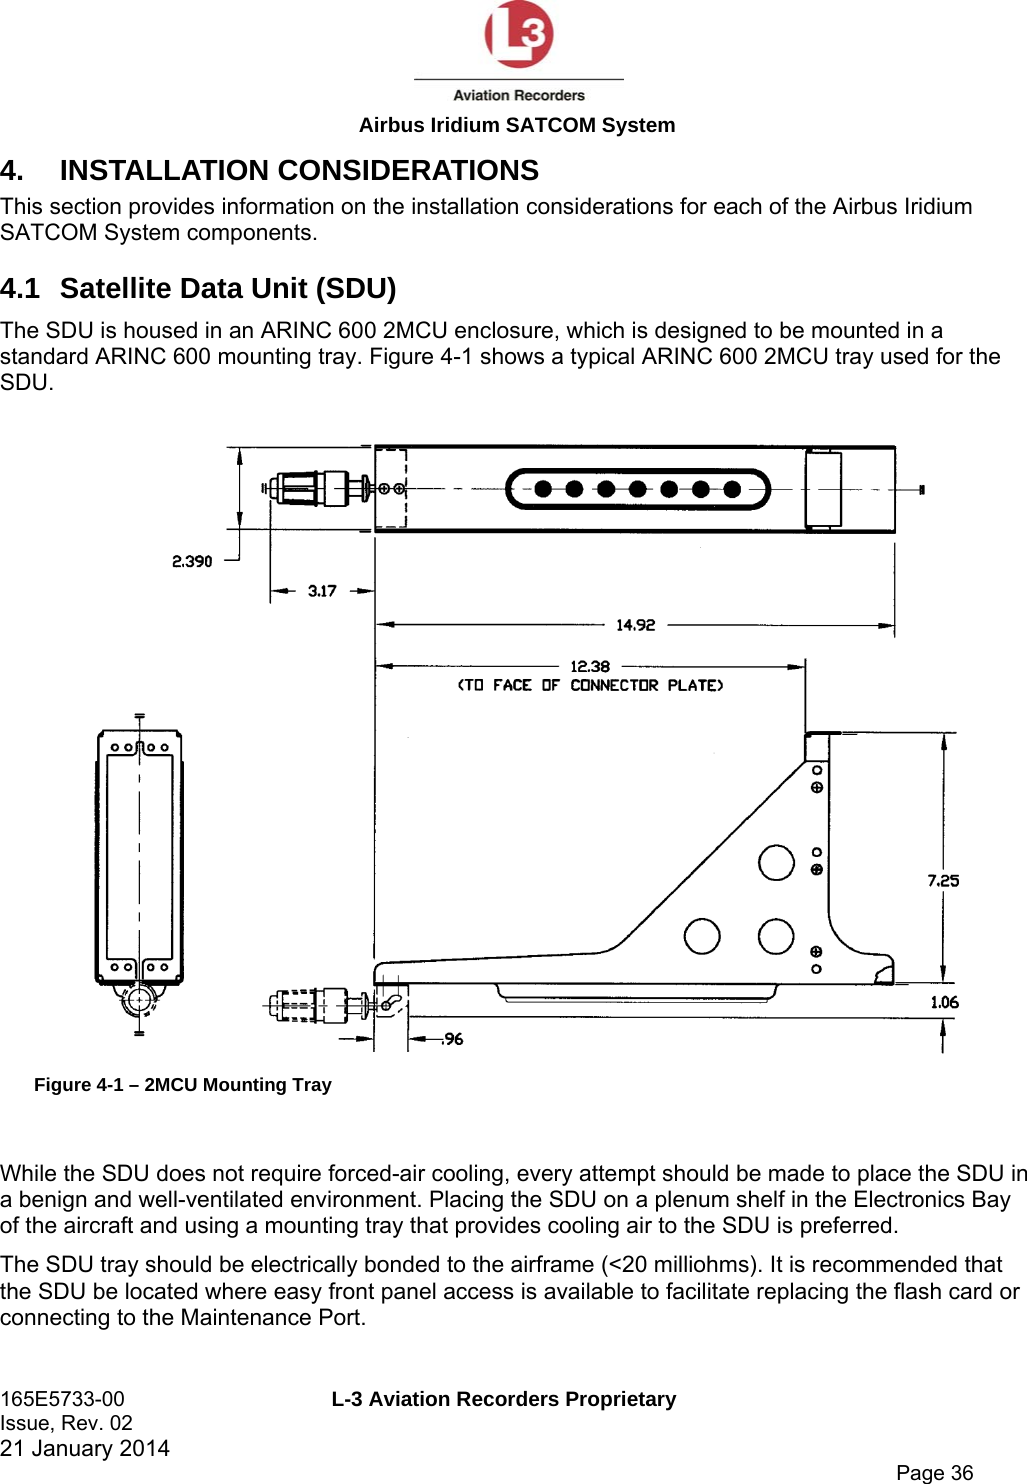  Airbus Iridium SATCOM System 165E5733-00  L-3 Aviation Recorders Proprietary Issue, Rev. 02   21 January 2014      Page 36 4. INSTALLATION CONSIDERATIONS This section provides information on the installation considerations for each of the Airbus Iridium SATCOM System components. 4.1  Satellite Data Unit (SDU) The SDU is housed in an ARINC 600 2MCU enclosure, which is designed to be mounted in a standard ARINC 600 mounting tray. Figure 4-1 shows a typical ARINC 600 2MCU tray used for the SDU.  Figure 4-1 – 2MCU Mounting Tray  While the SDU does not require forced-air cooling, every attempt should be made to place the SDU in a benign and well-ventilated environment. Placing the SDU on a plenum shelf in the Electronics Bay of the aircraft and using a mounting tray that provides cooling air to the SDU is preferred. The SDU tray should be electrically bonded to the airframe (&lt;20 milliohms). It is recommended that the SDU be located where easy front panel access is available to facilitate replacing the flash card or connecting to the Maintenance Port. 